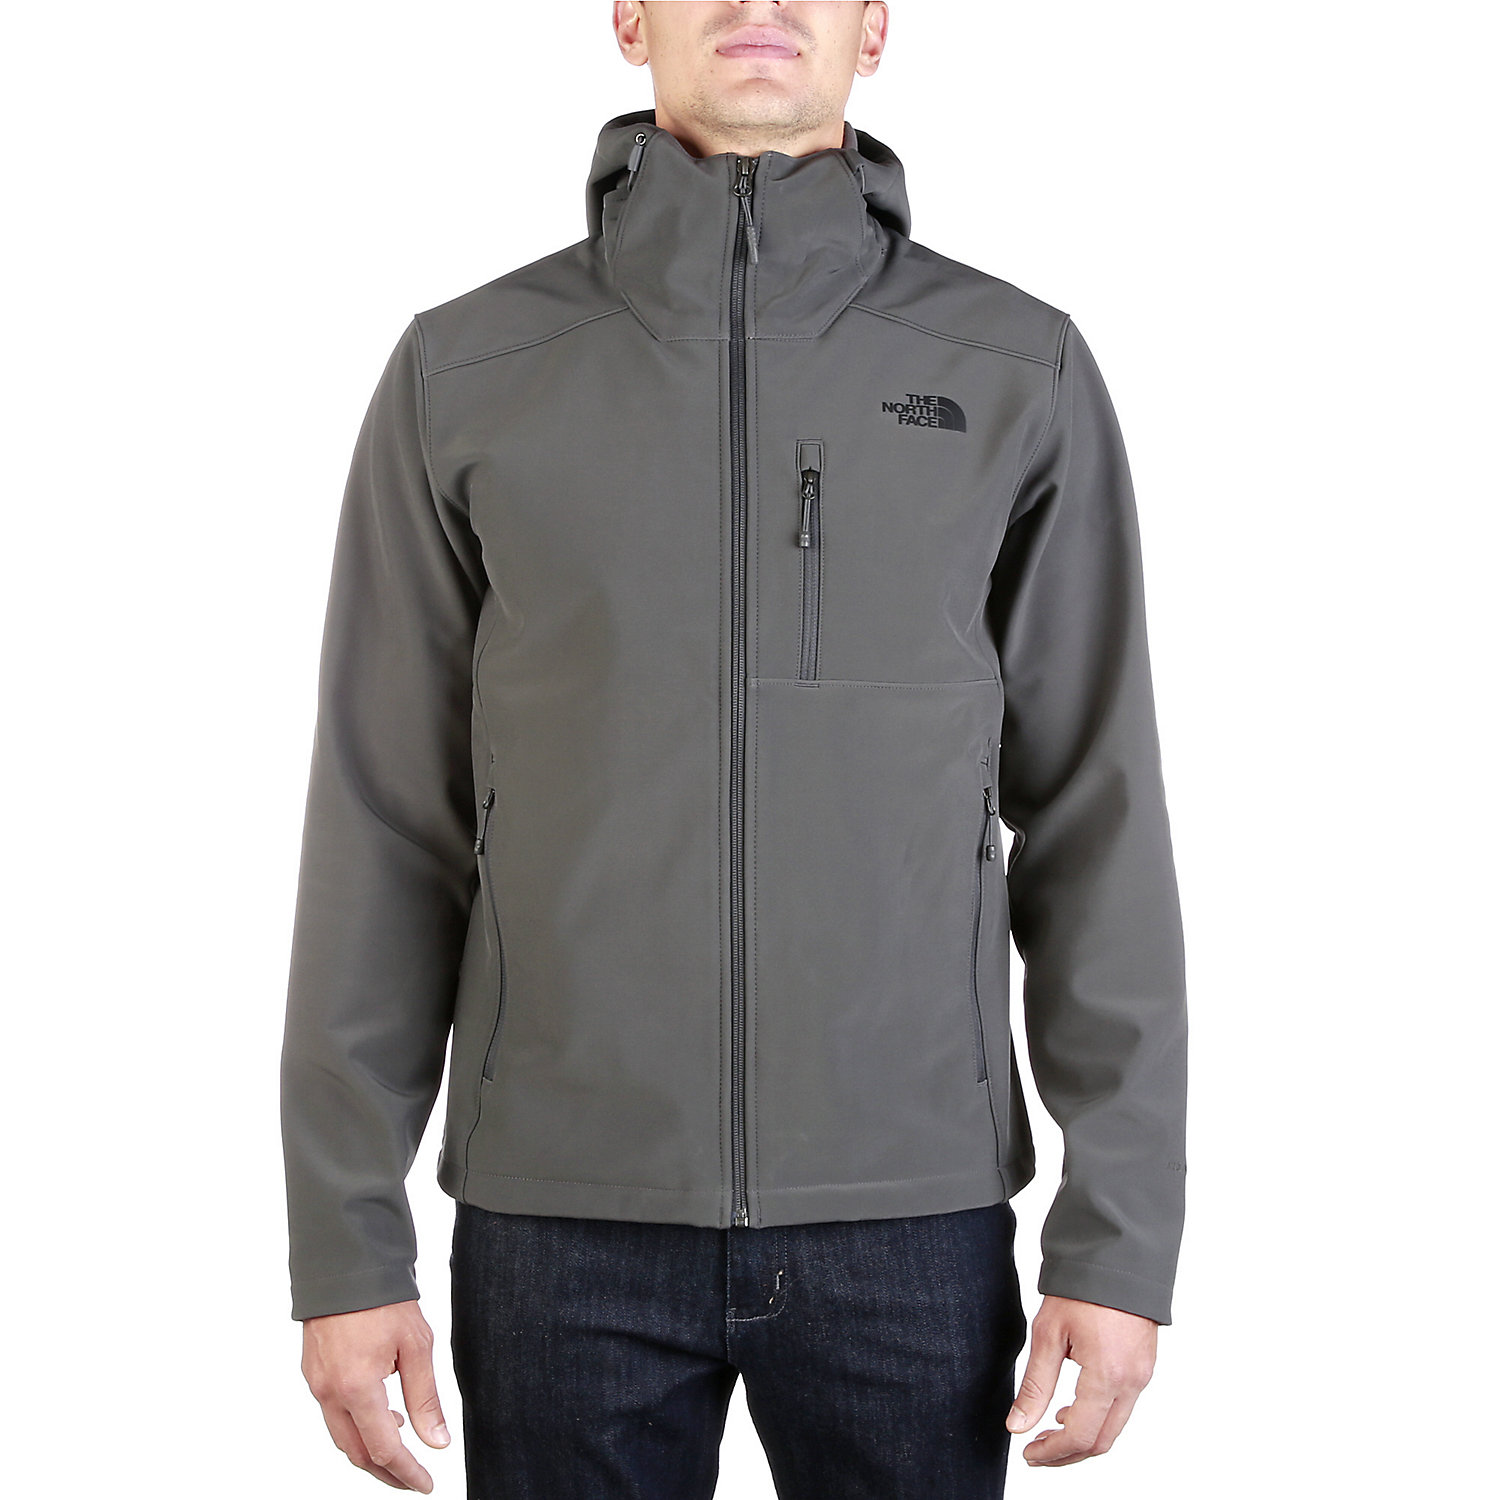 The North Face Men's Apex Bionic 2 Hoodie - Large, TNF Black